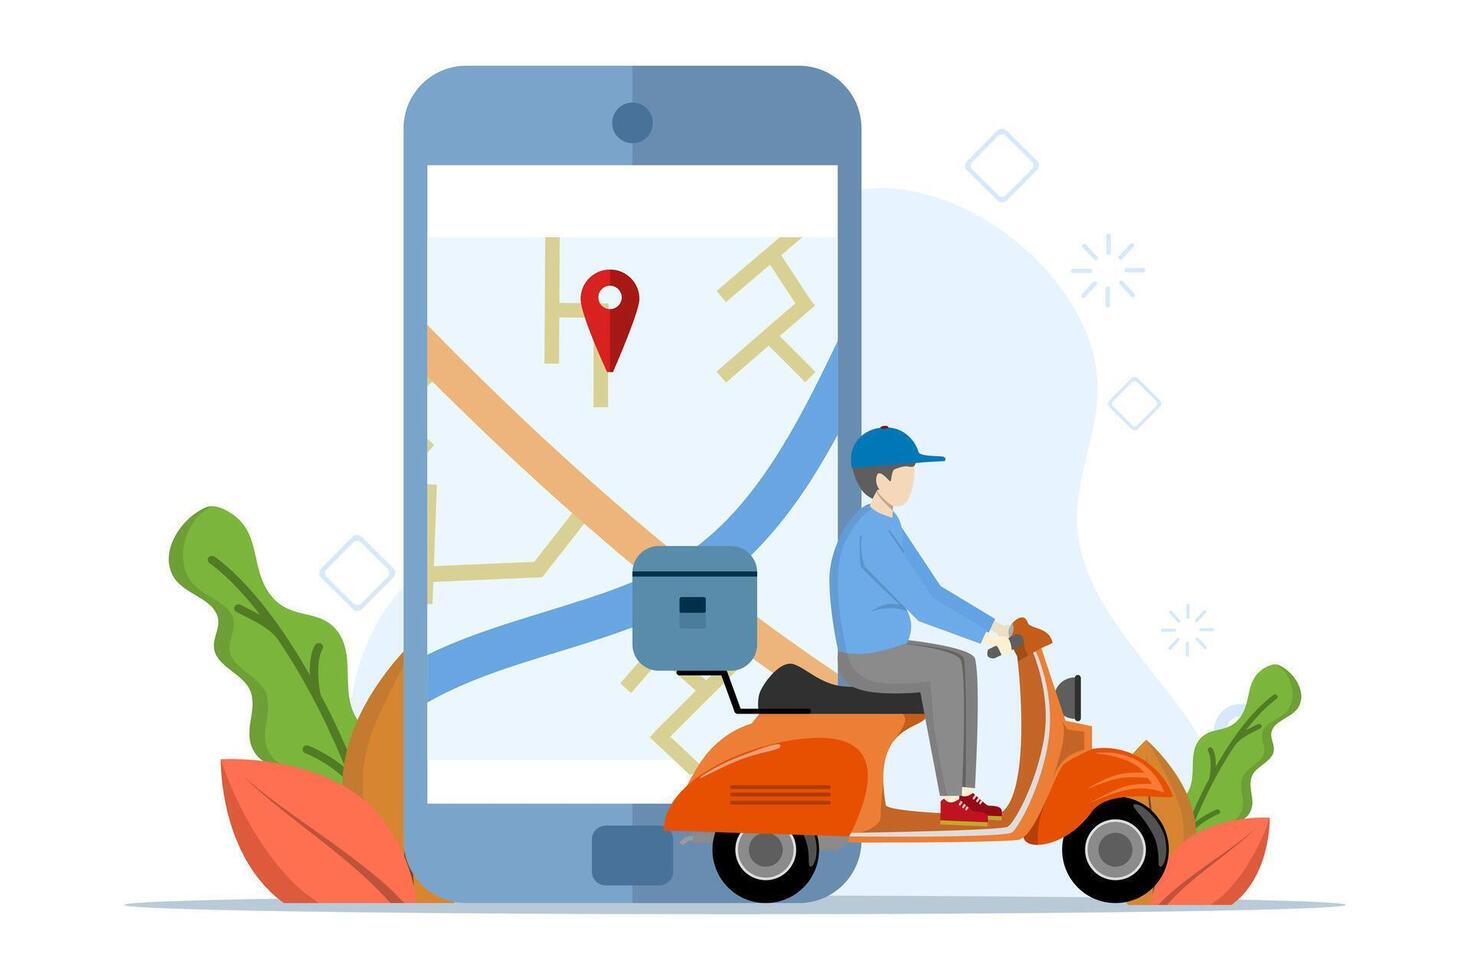 The concept of sending a package to a destination. A man rides a scooter with a box. Package delivery tracking notification on phone metaphor. flat vector illustration on white background.